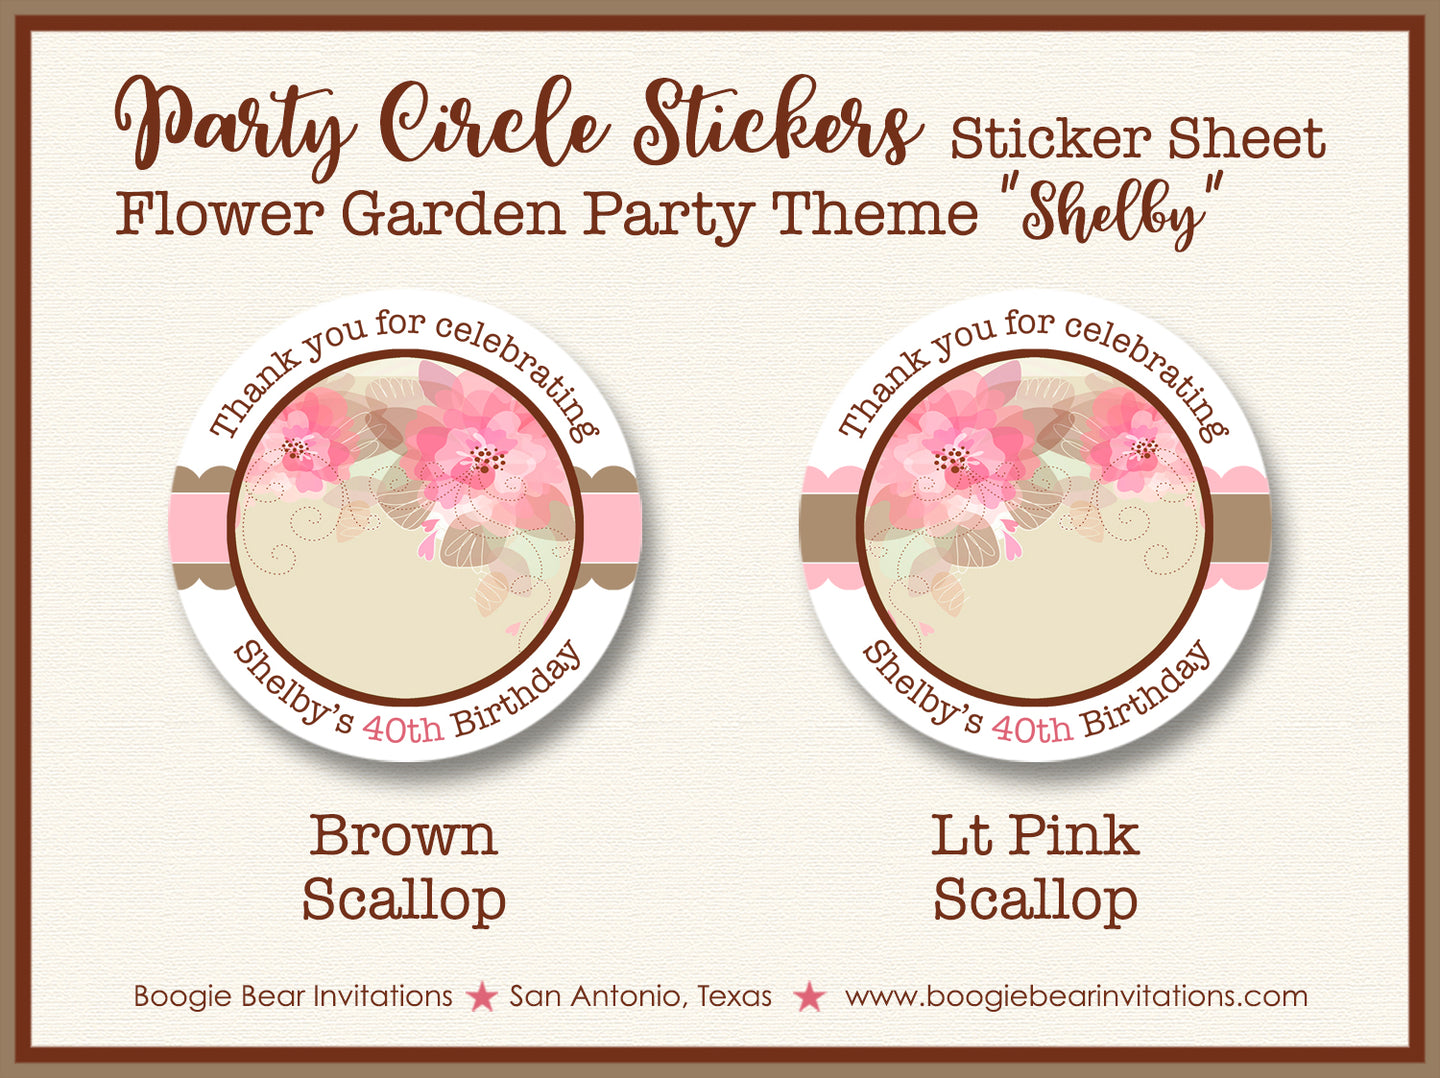 Elegant Flowers Birthday Party Stickers Circle Sheet Round Pink Garden Boogie Bear Invitations Shelby Theme